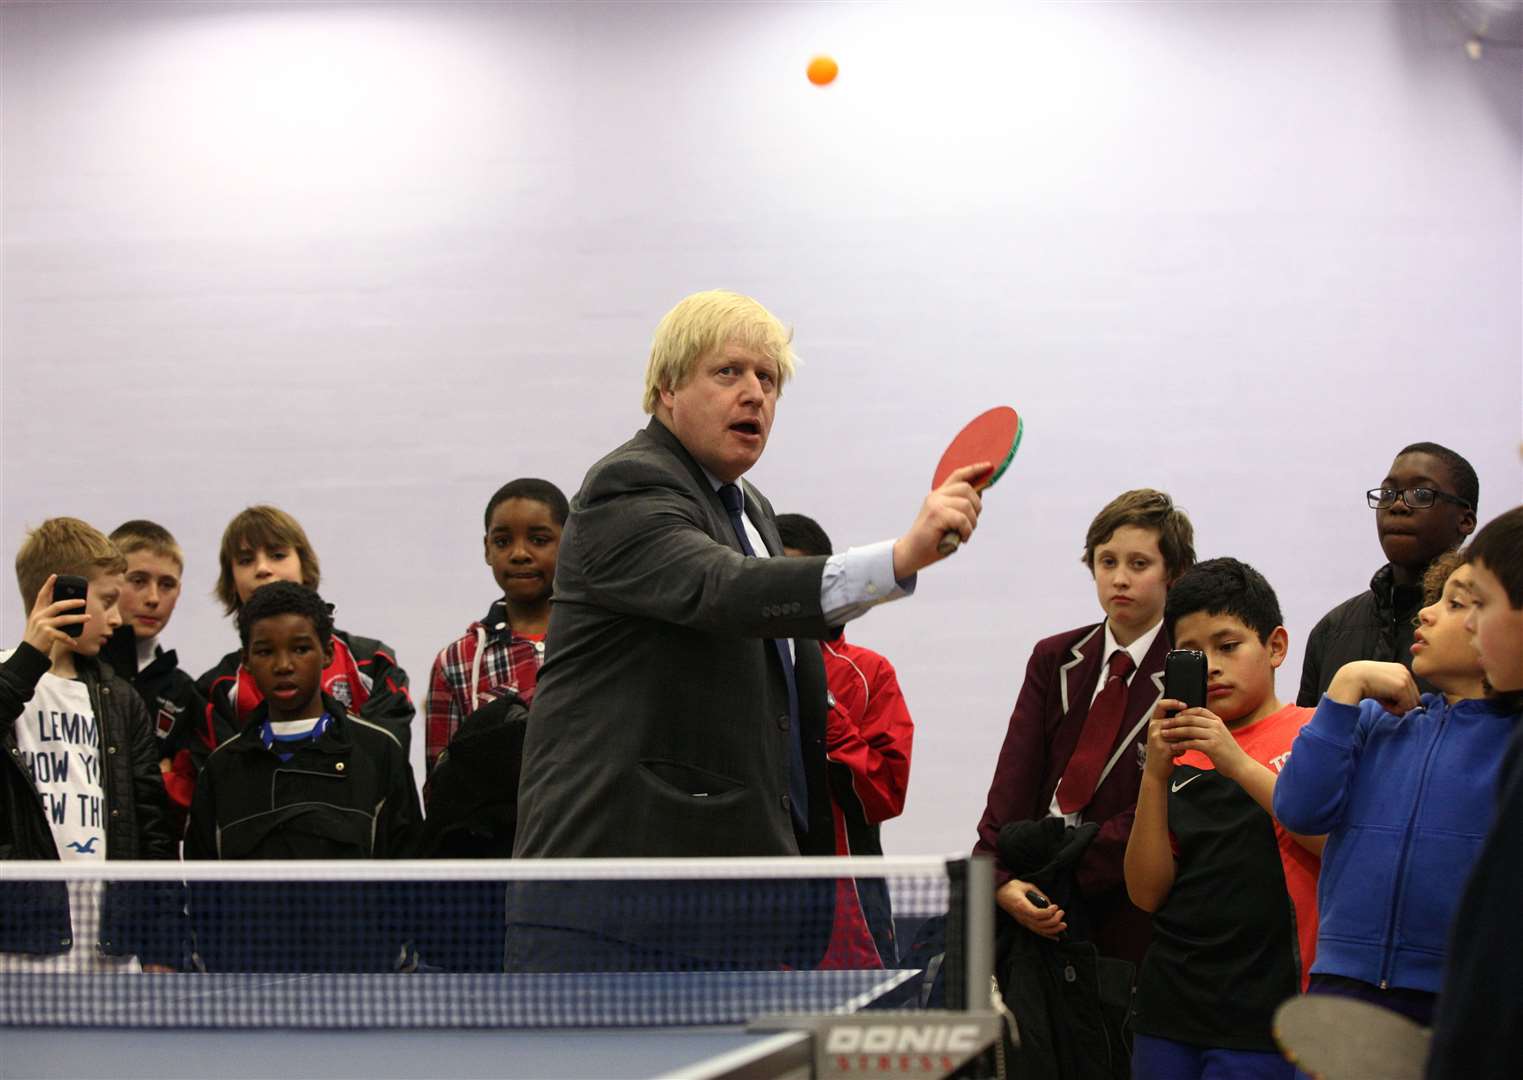 … and his fondness for table tennis had him claiming it was originally an English invention called wiff-waff (Yui Mok/PA)